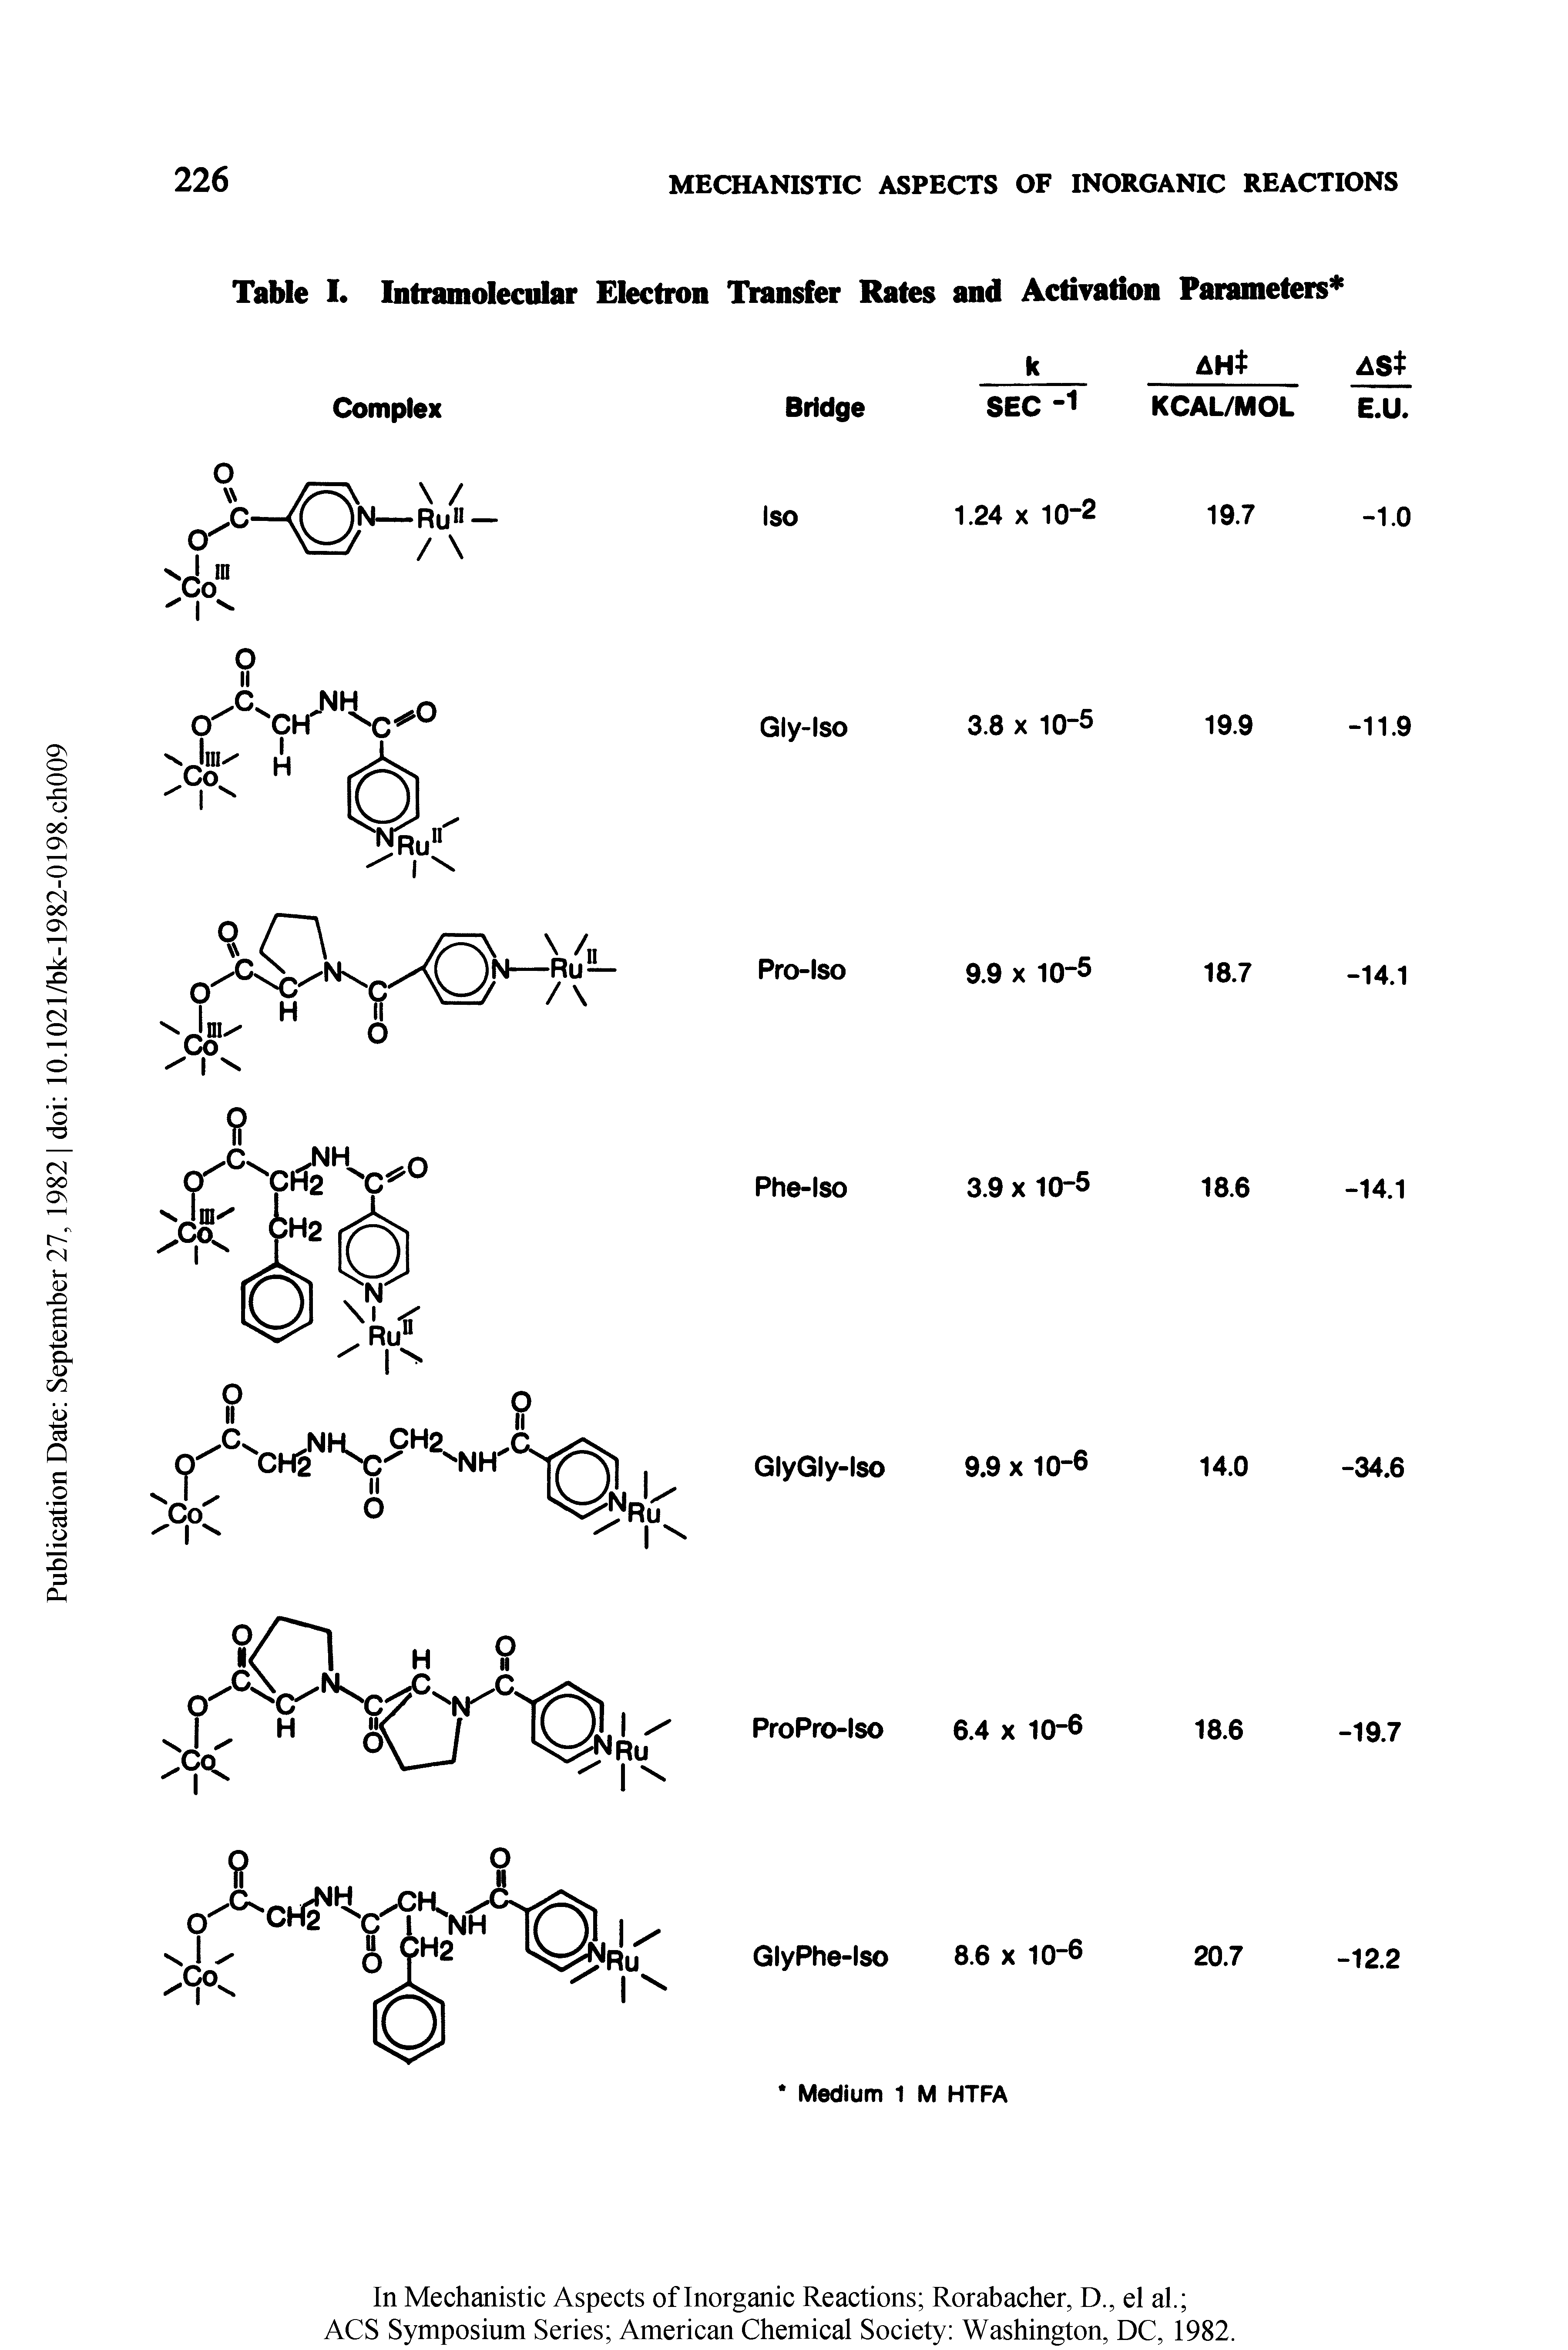 Table I. Intramolecular Electron Transfer Rates and Activation Parameters ...